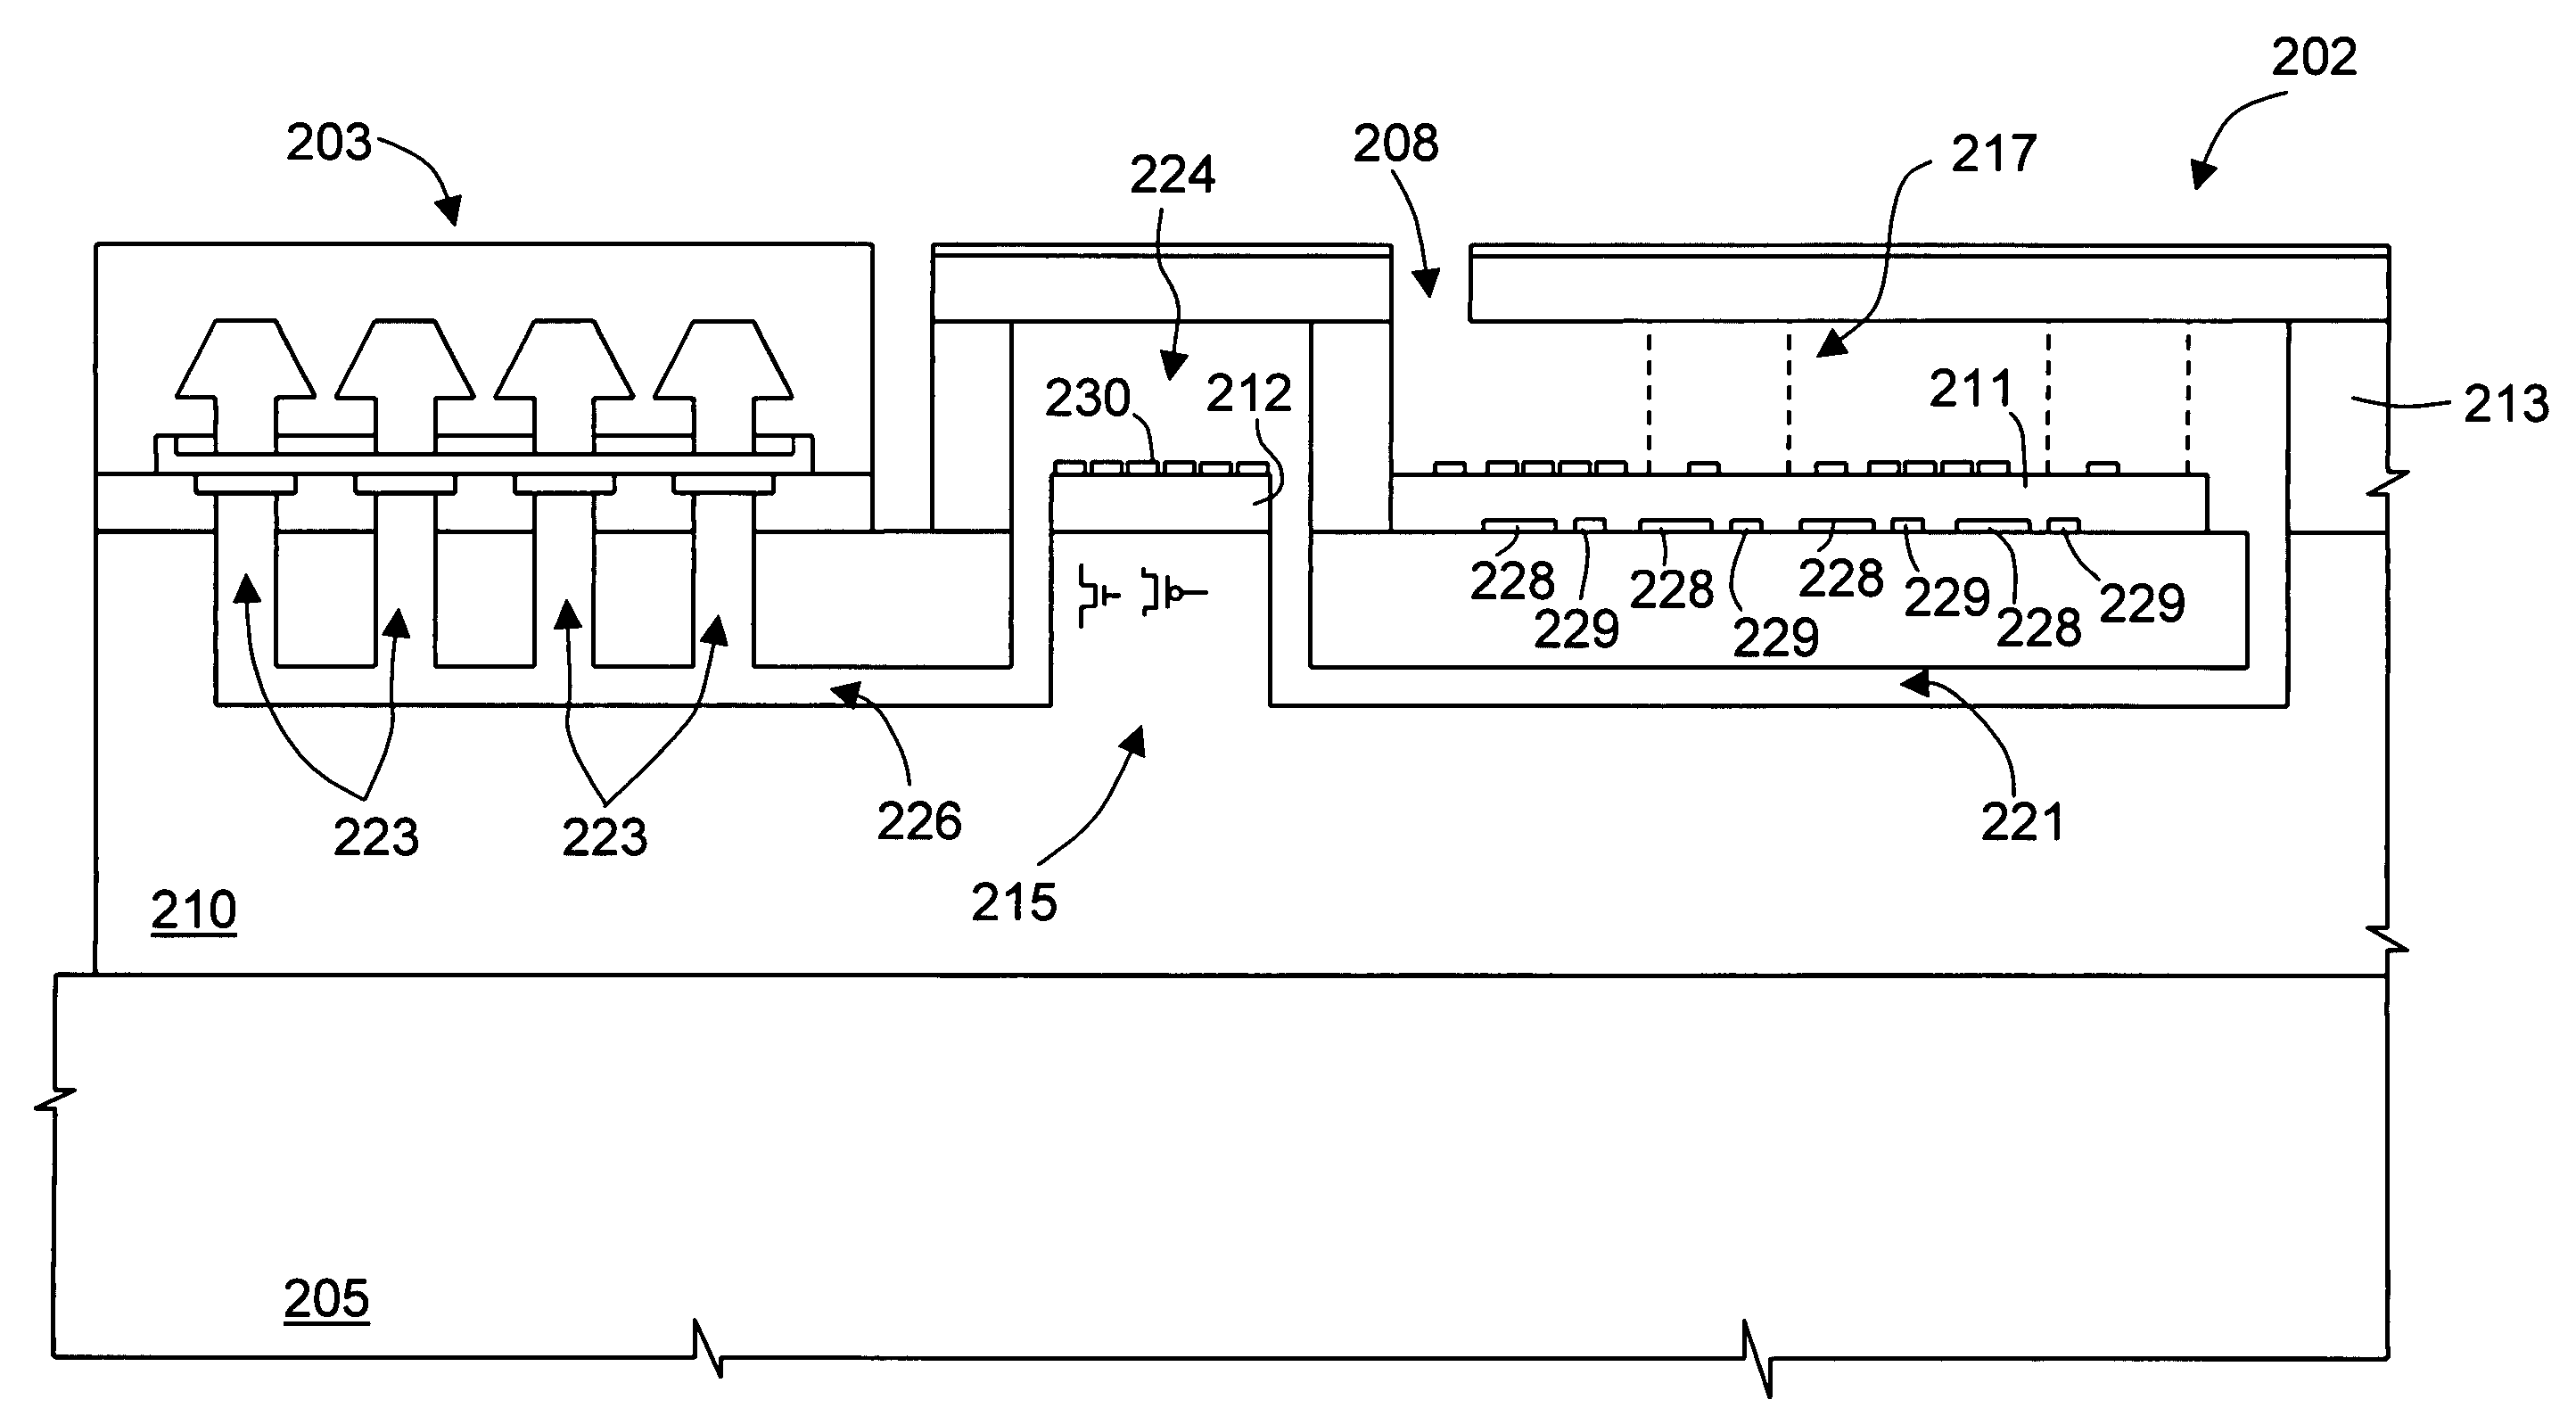 Apparatus for biochemical analysis